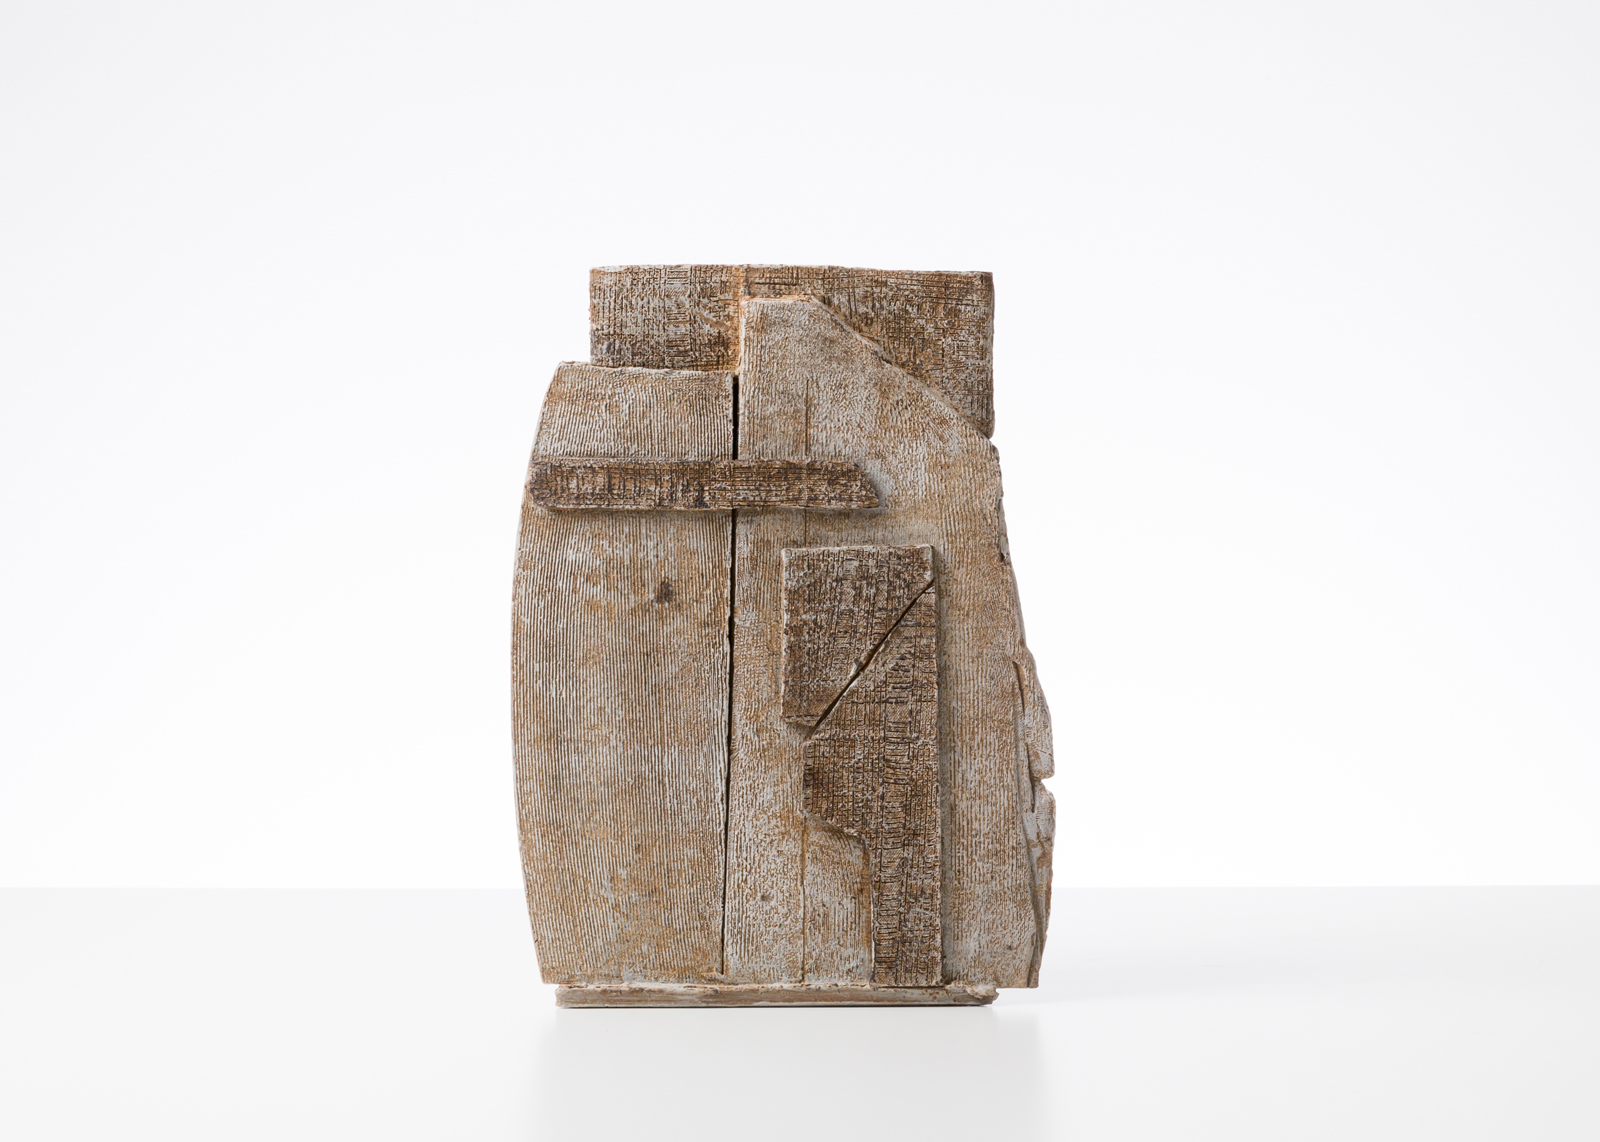 STELE #16, 2016 stoneware and slip, 16 3/8 x 12 x 4 in, private collection